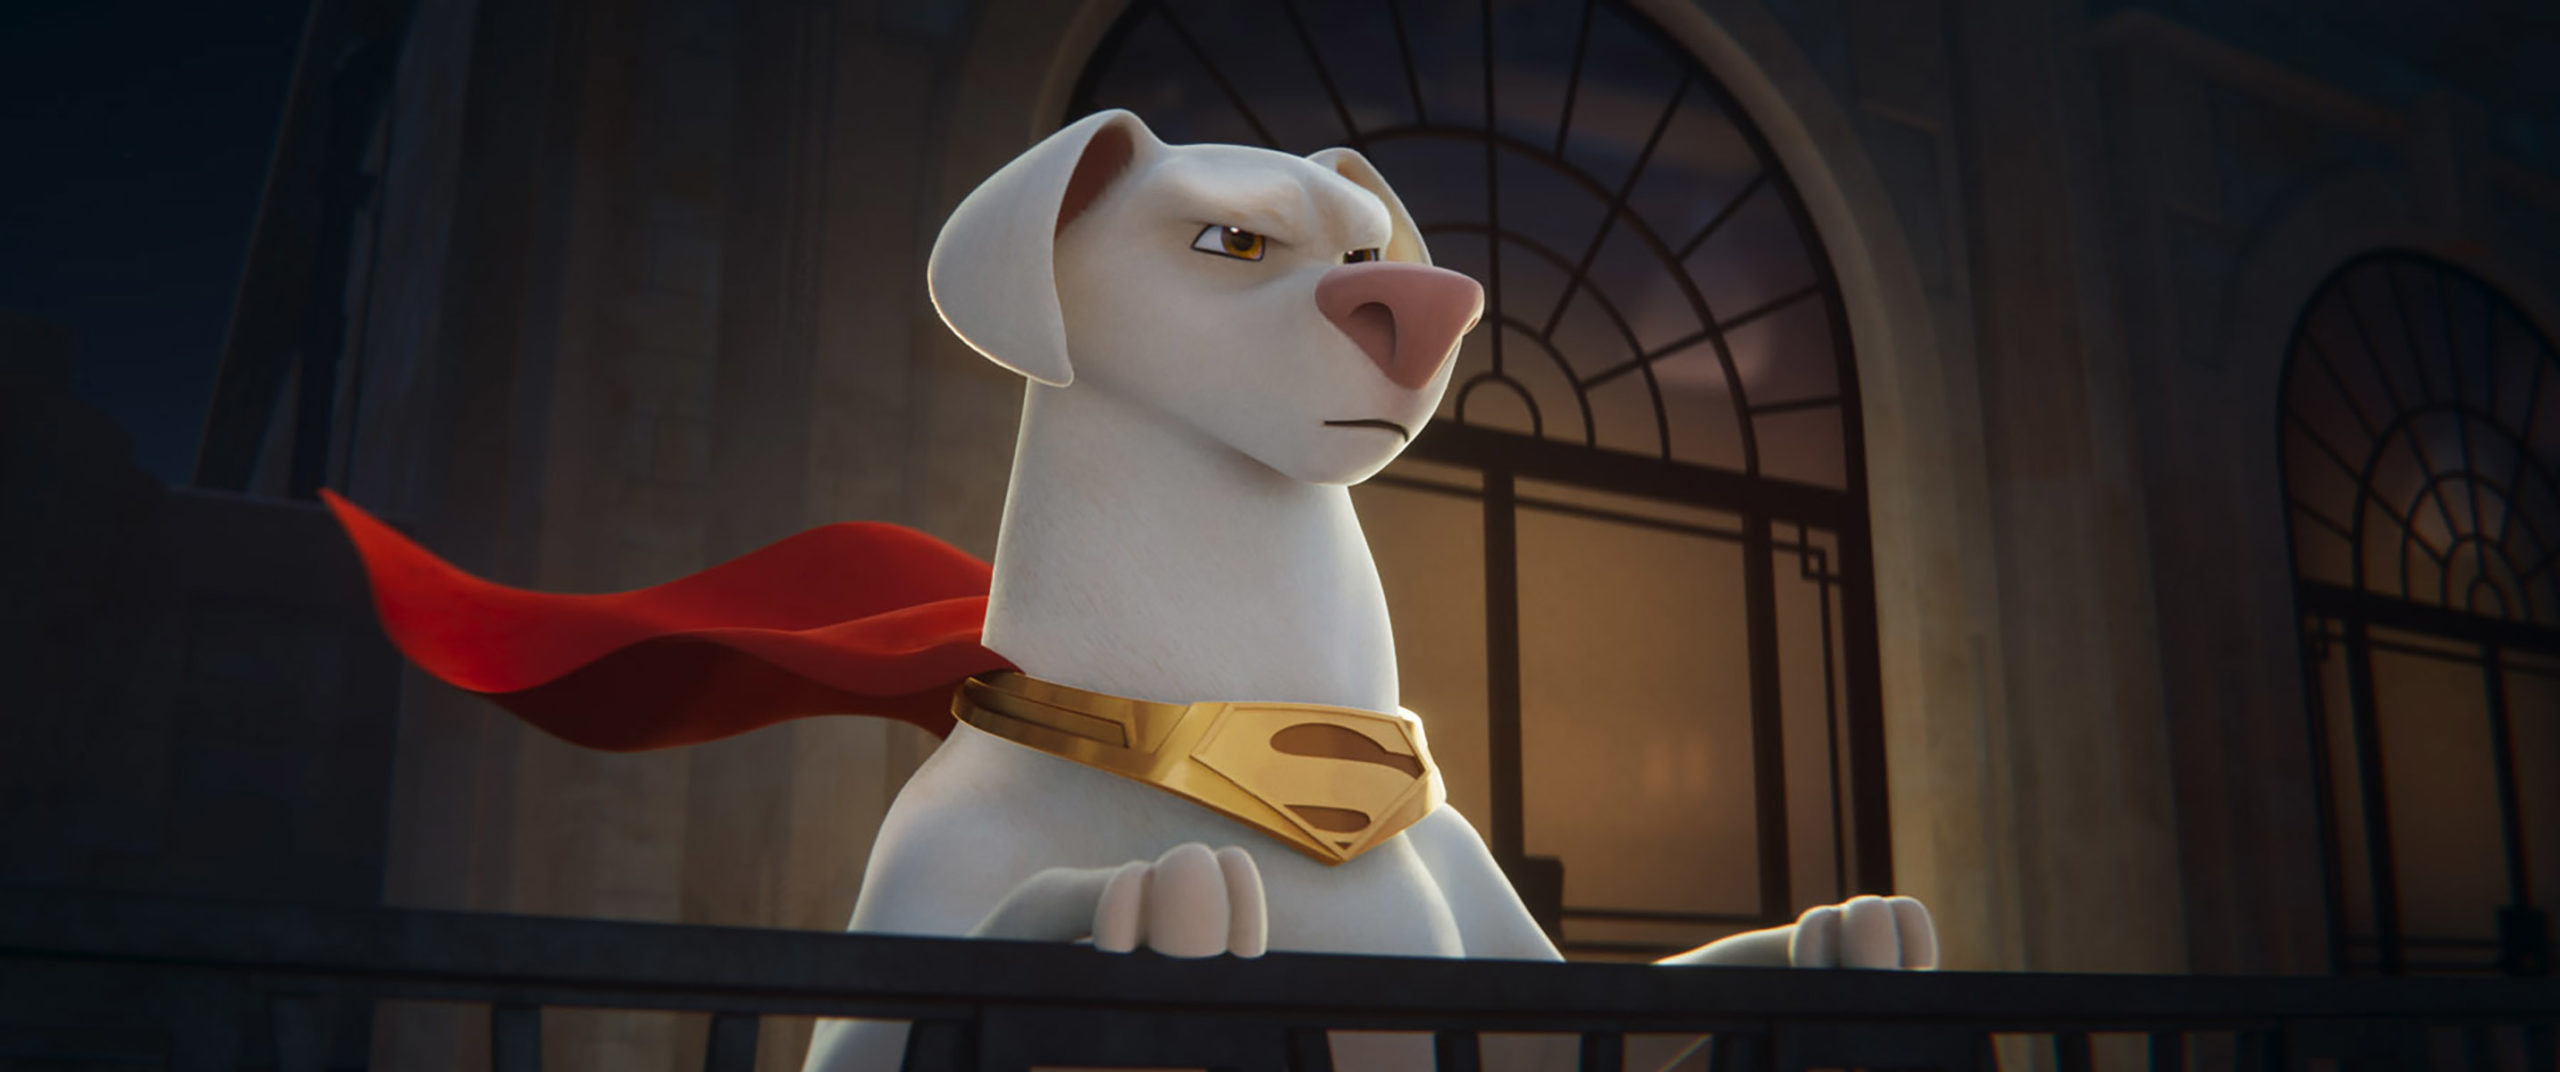 DC League of Super-Pets Trailer Introduces New Breed of Superheroes